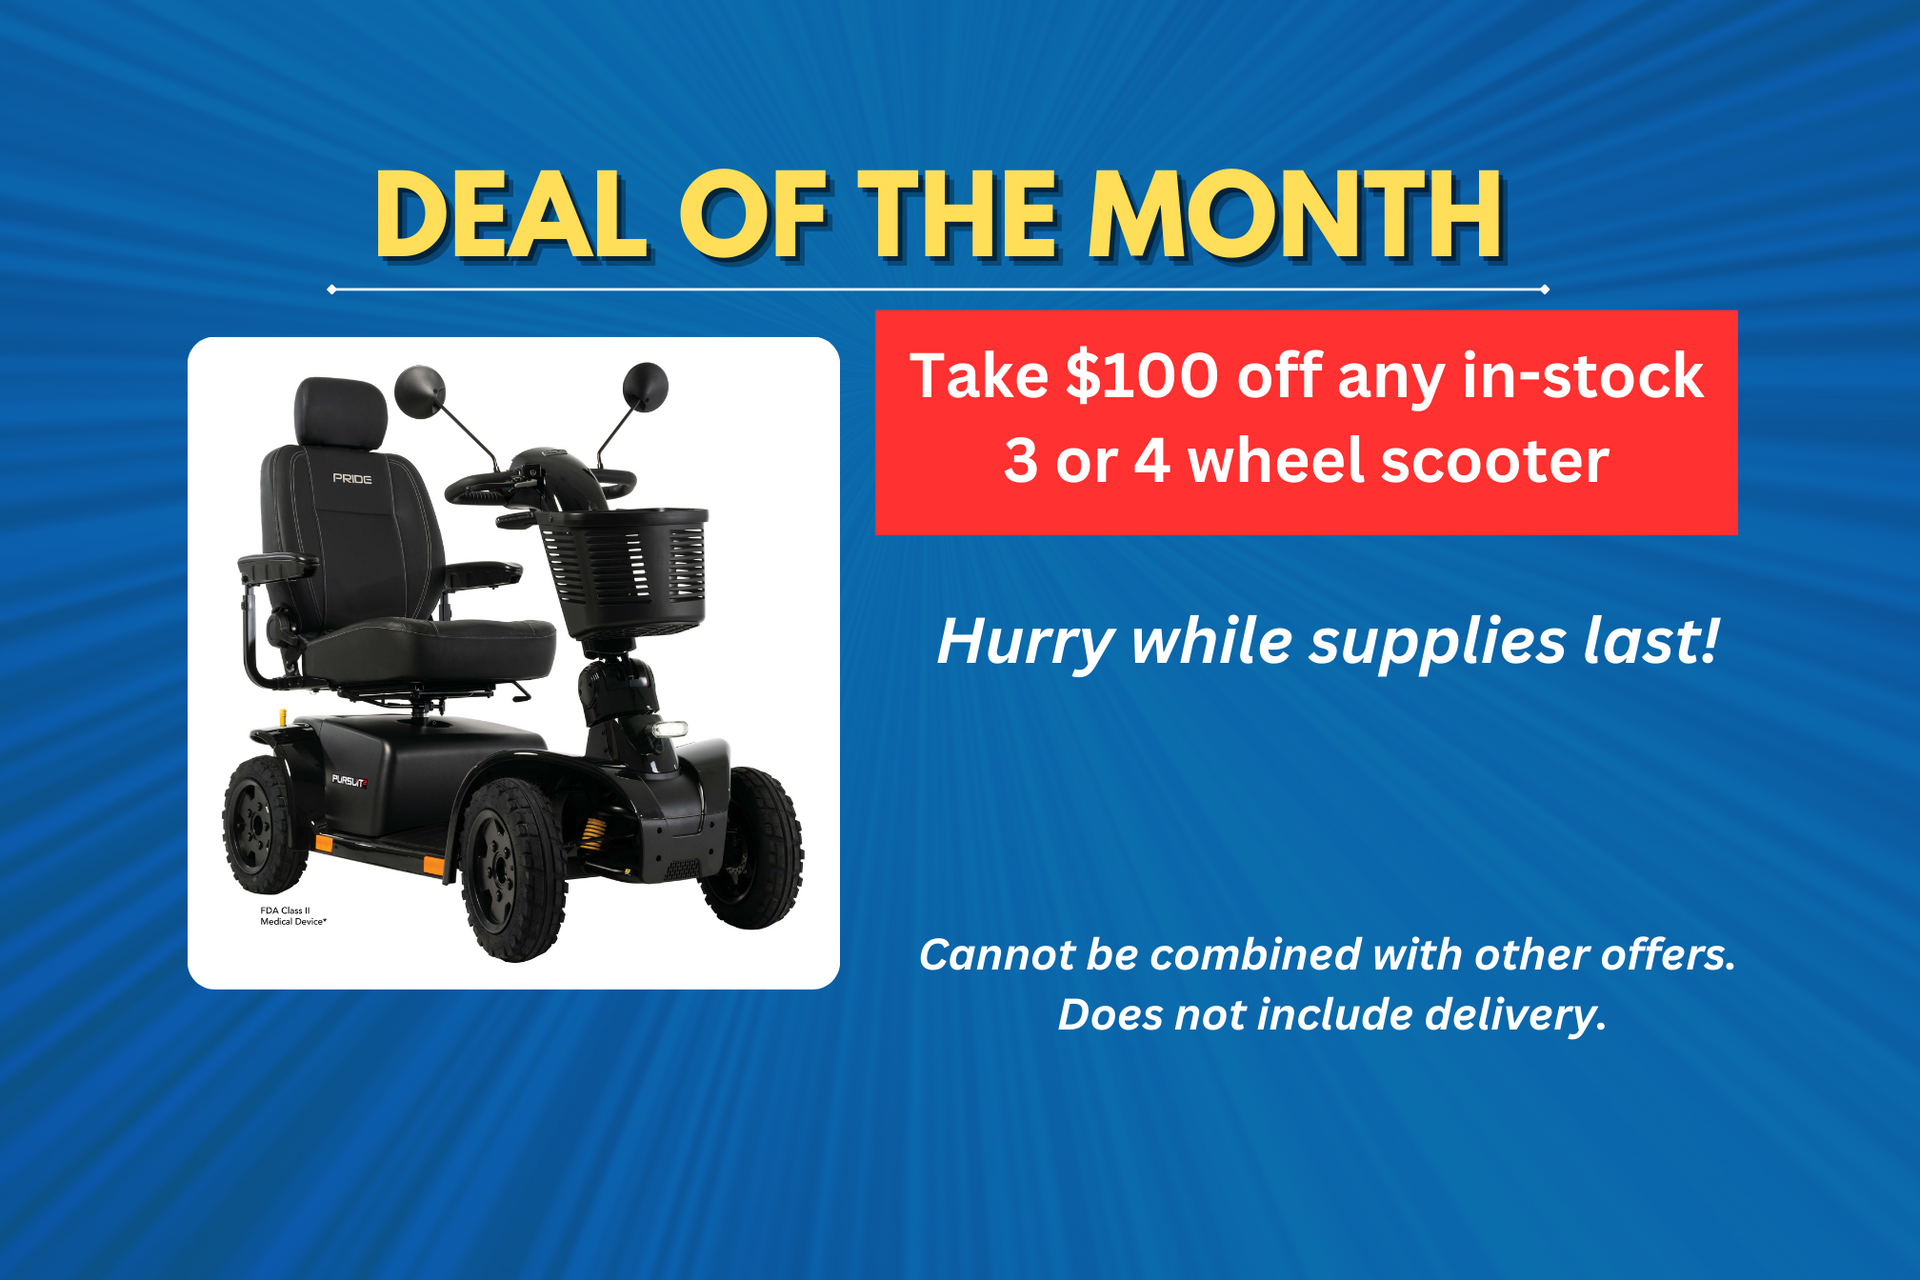 Deal of the Month: Stander Let's Move Rollator